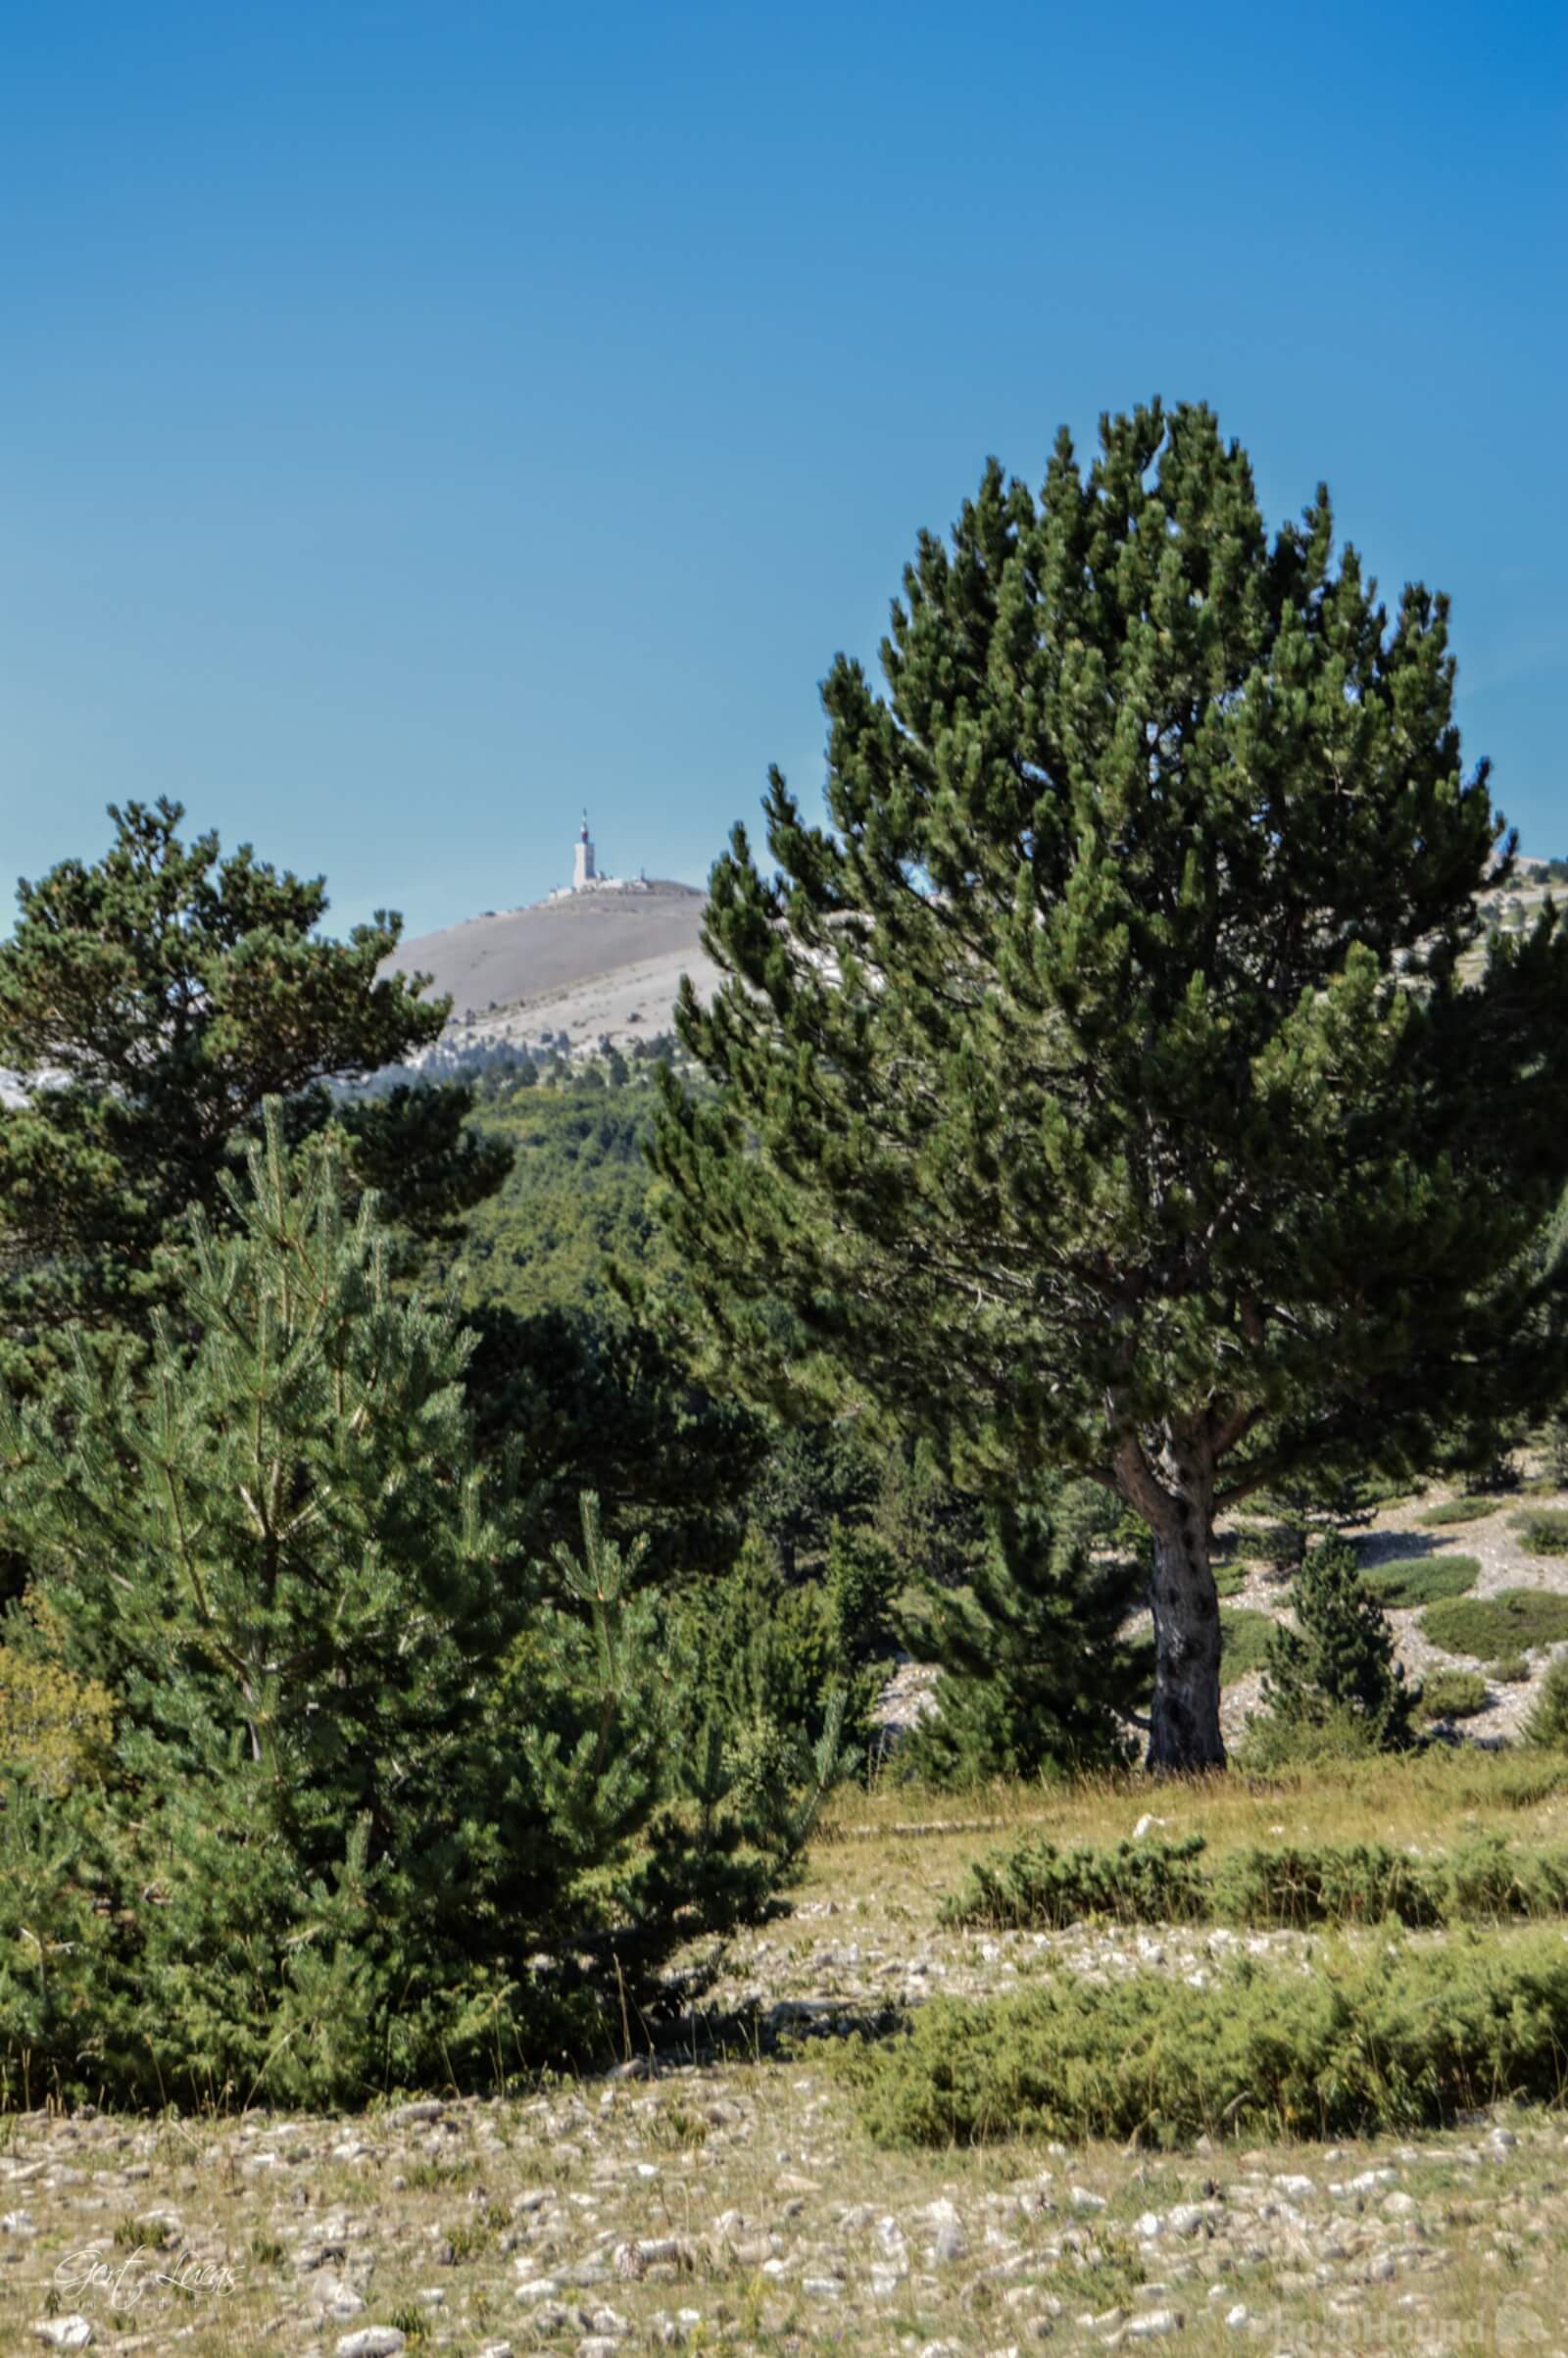 Image of Mt Ventoux from the east by Gert Lucas